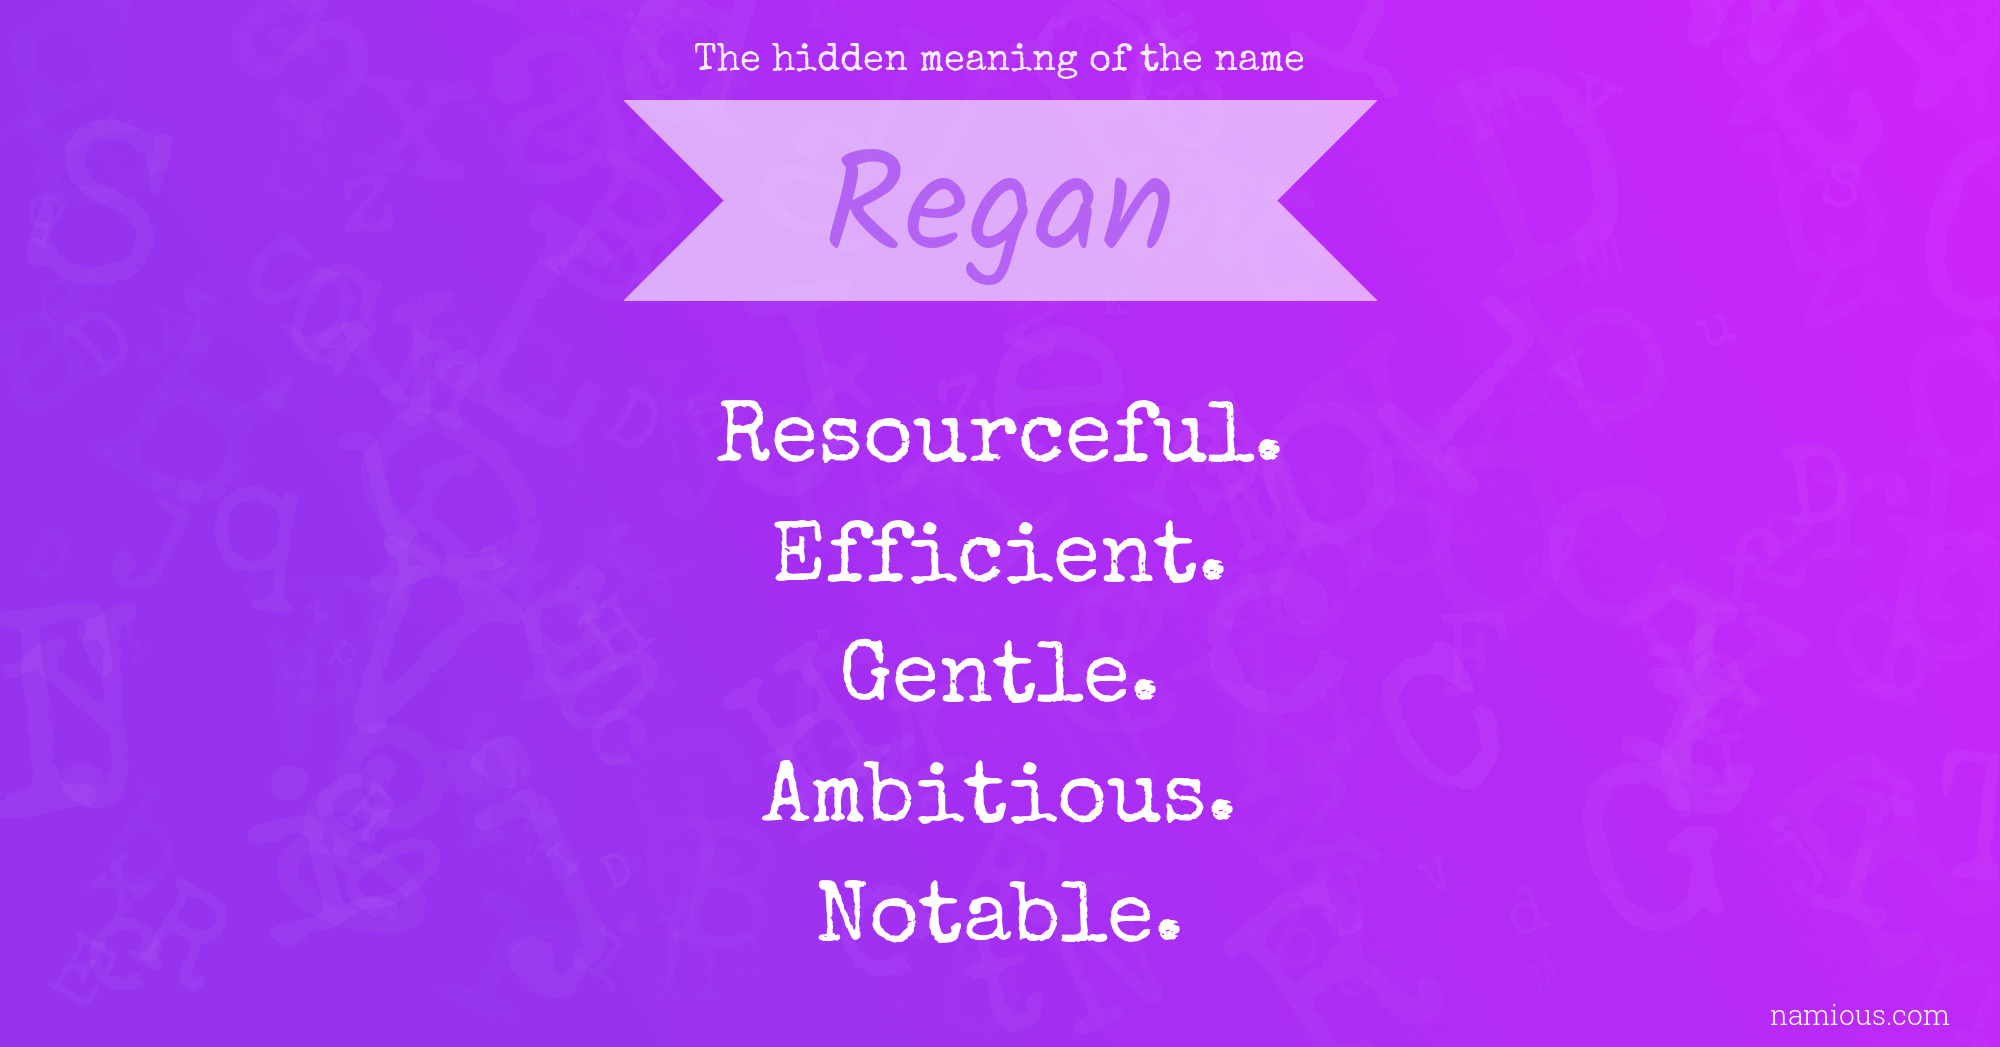 The hidden meaning of the name Regan